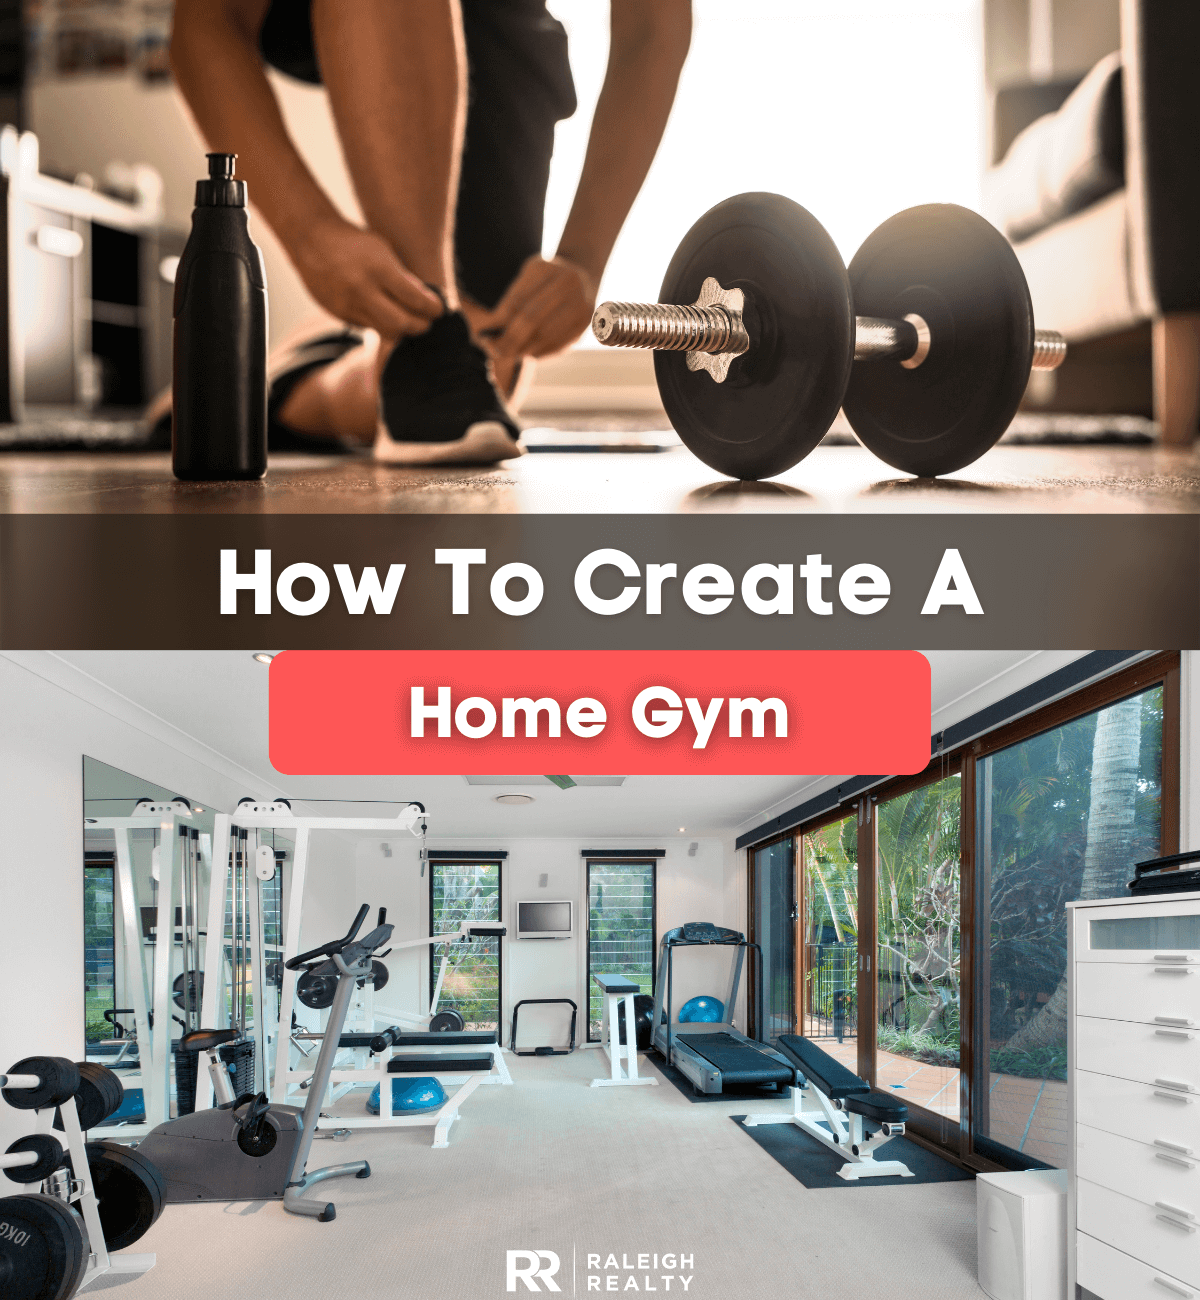 Home Gym - How to workout without going to the gym and finding ways to exercise at home